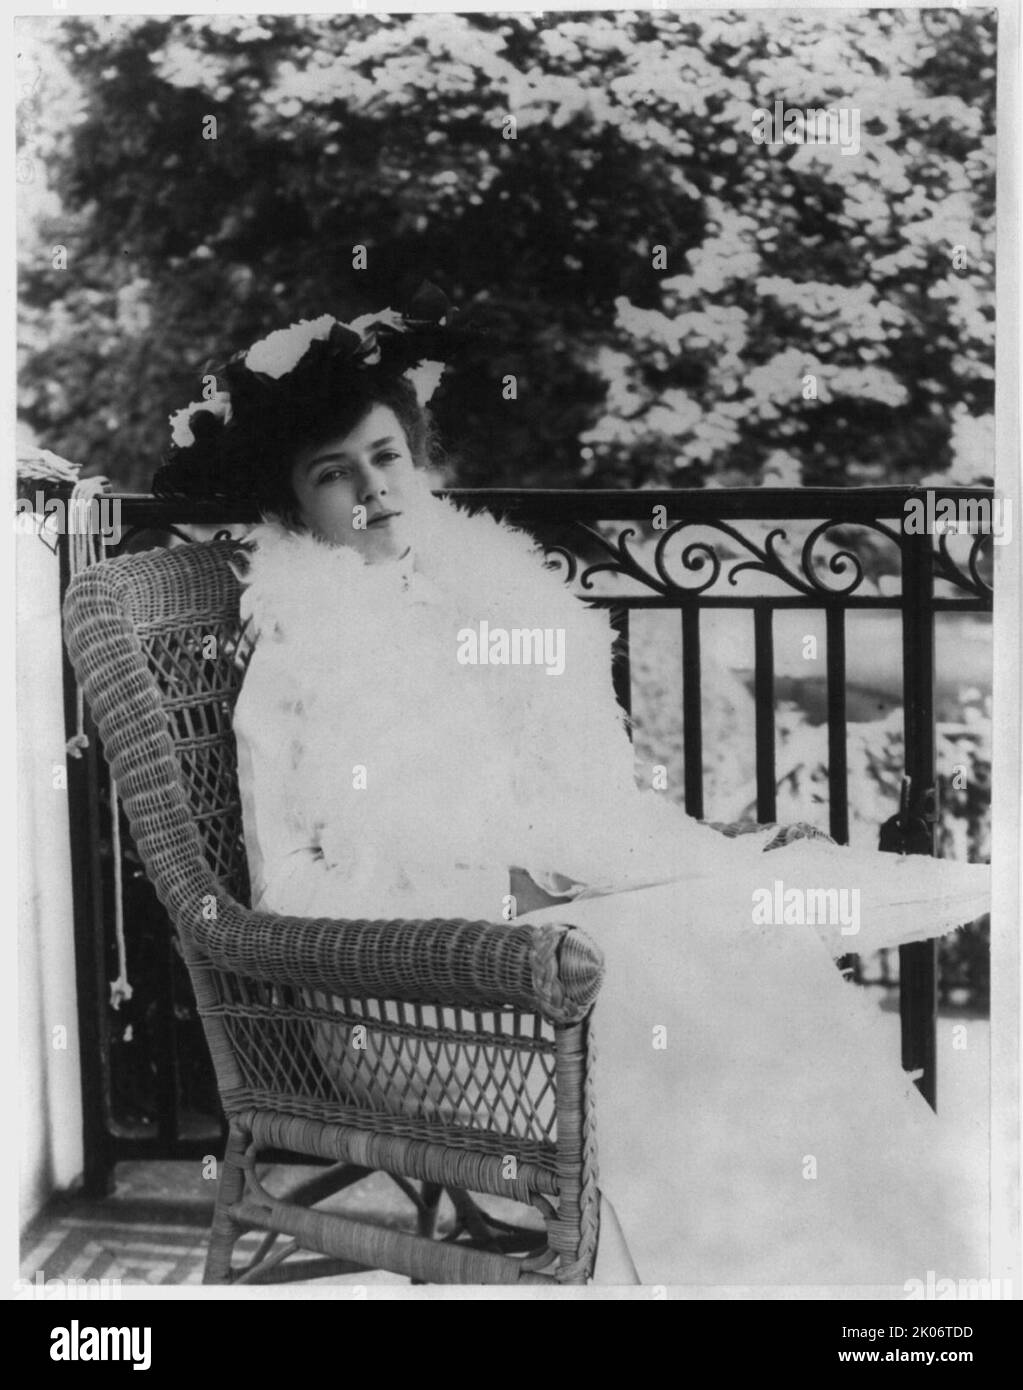 Alice Roosevelt Longworth, between c1890 and c1910. Full length portrait, seated in wicker chair, facing right. [Daughter of President Theodore Roosevelt and his first wife Alice Hathaway Lee]. Stock Photo